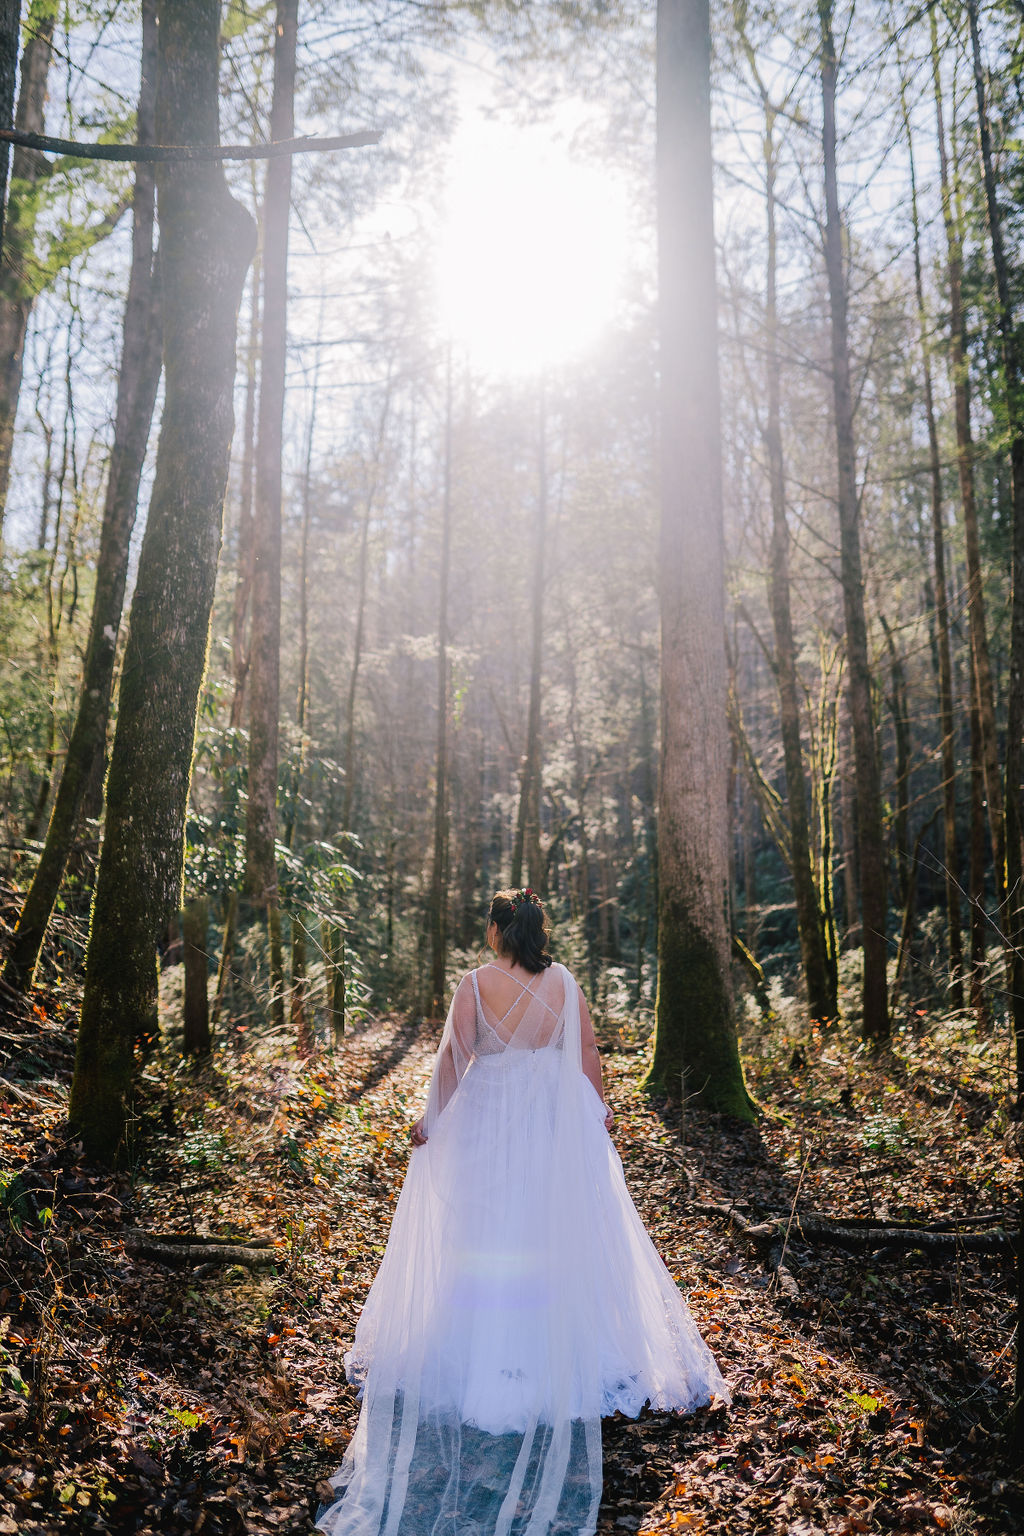 Wedding Photographers Sacramento captures a bride walking into the woods as the sun gleams through the tall tree